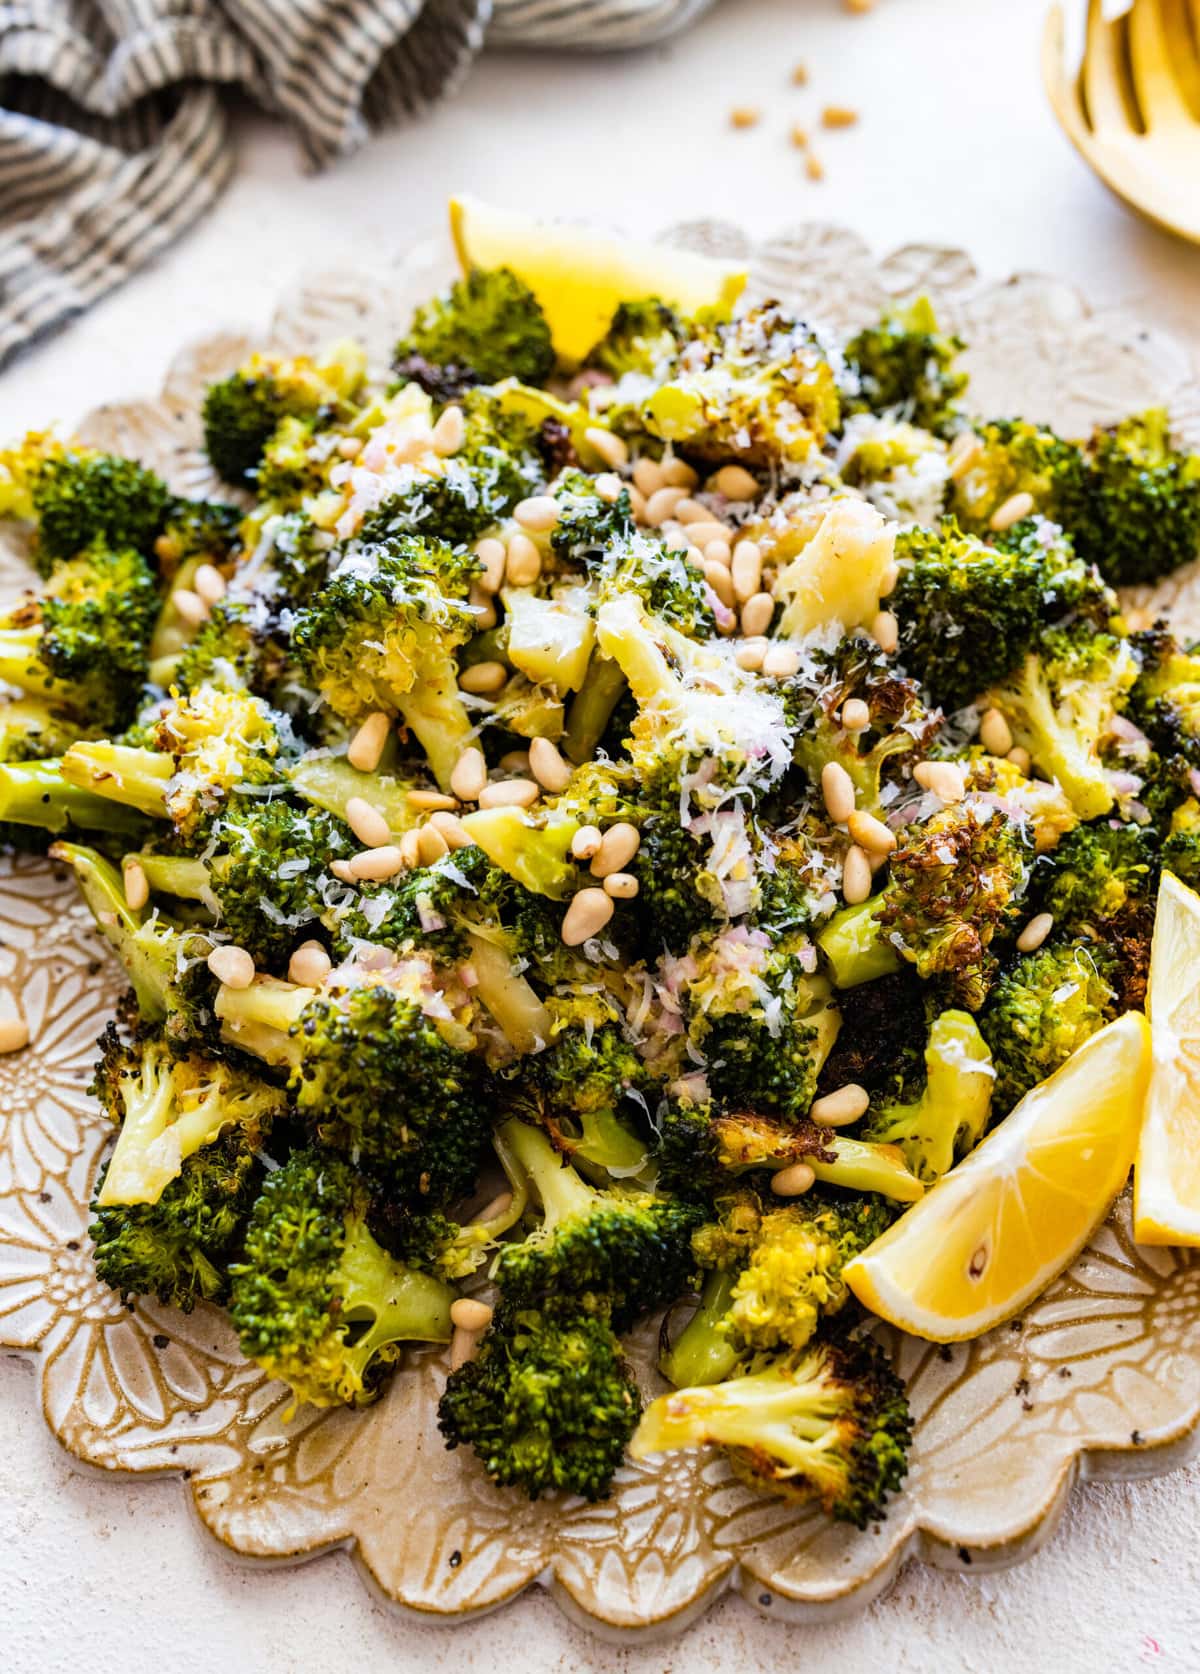 Tuscan roasted broccoli on a serving platter with parmigiano cheese and lemon wedges. Adding toasted pine nuts.